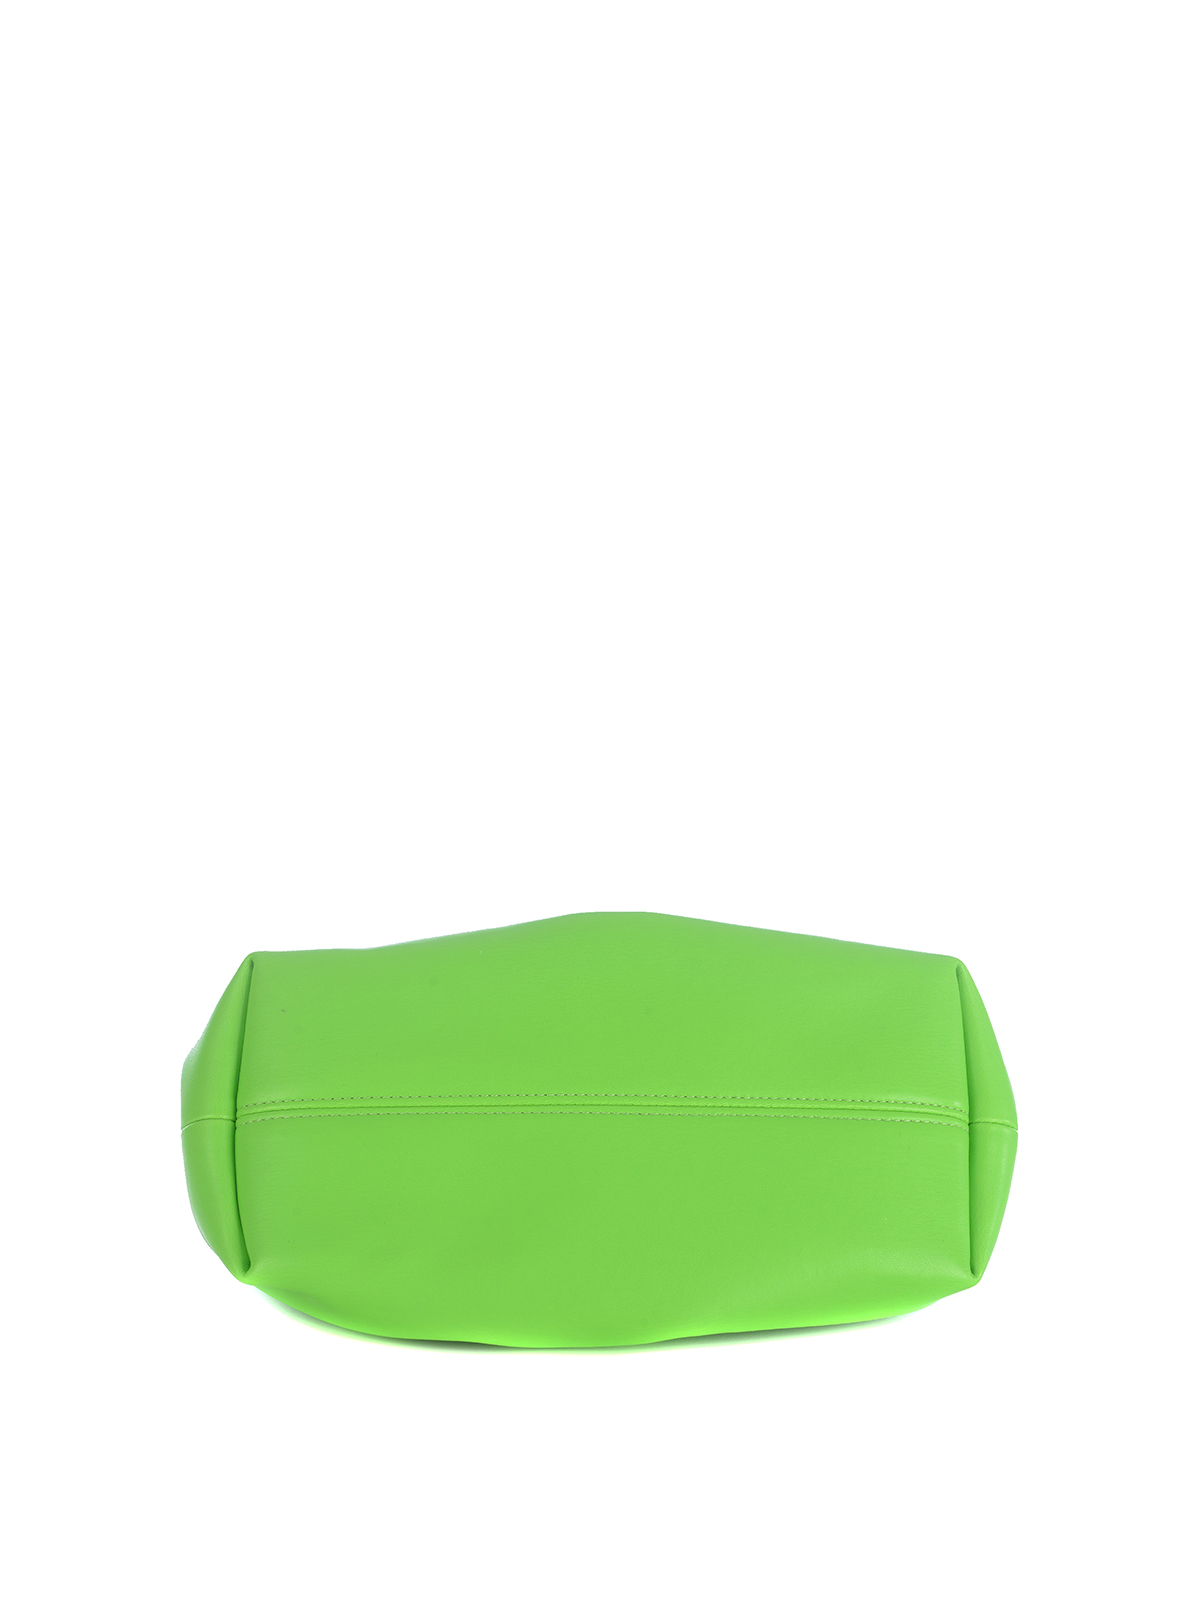 Shop Themoirè Faux Leather Clutch With Magnetic Closure In Green